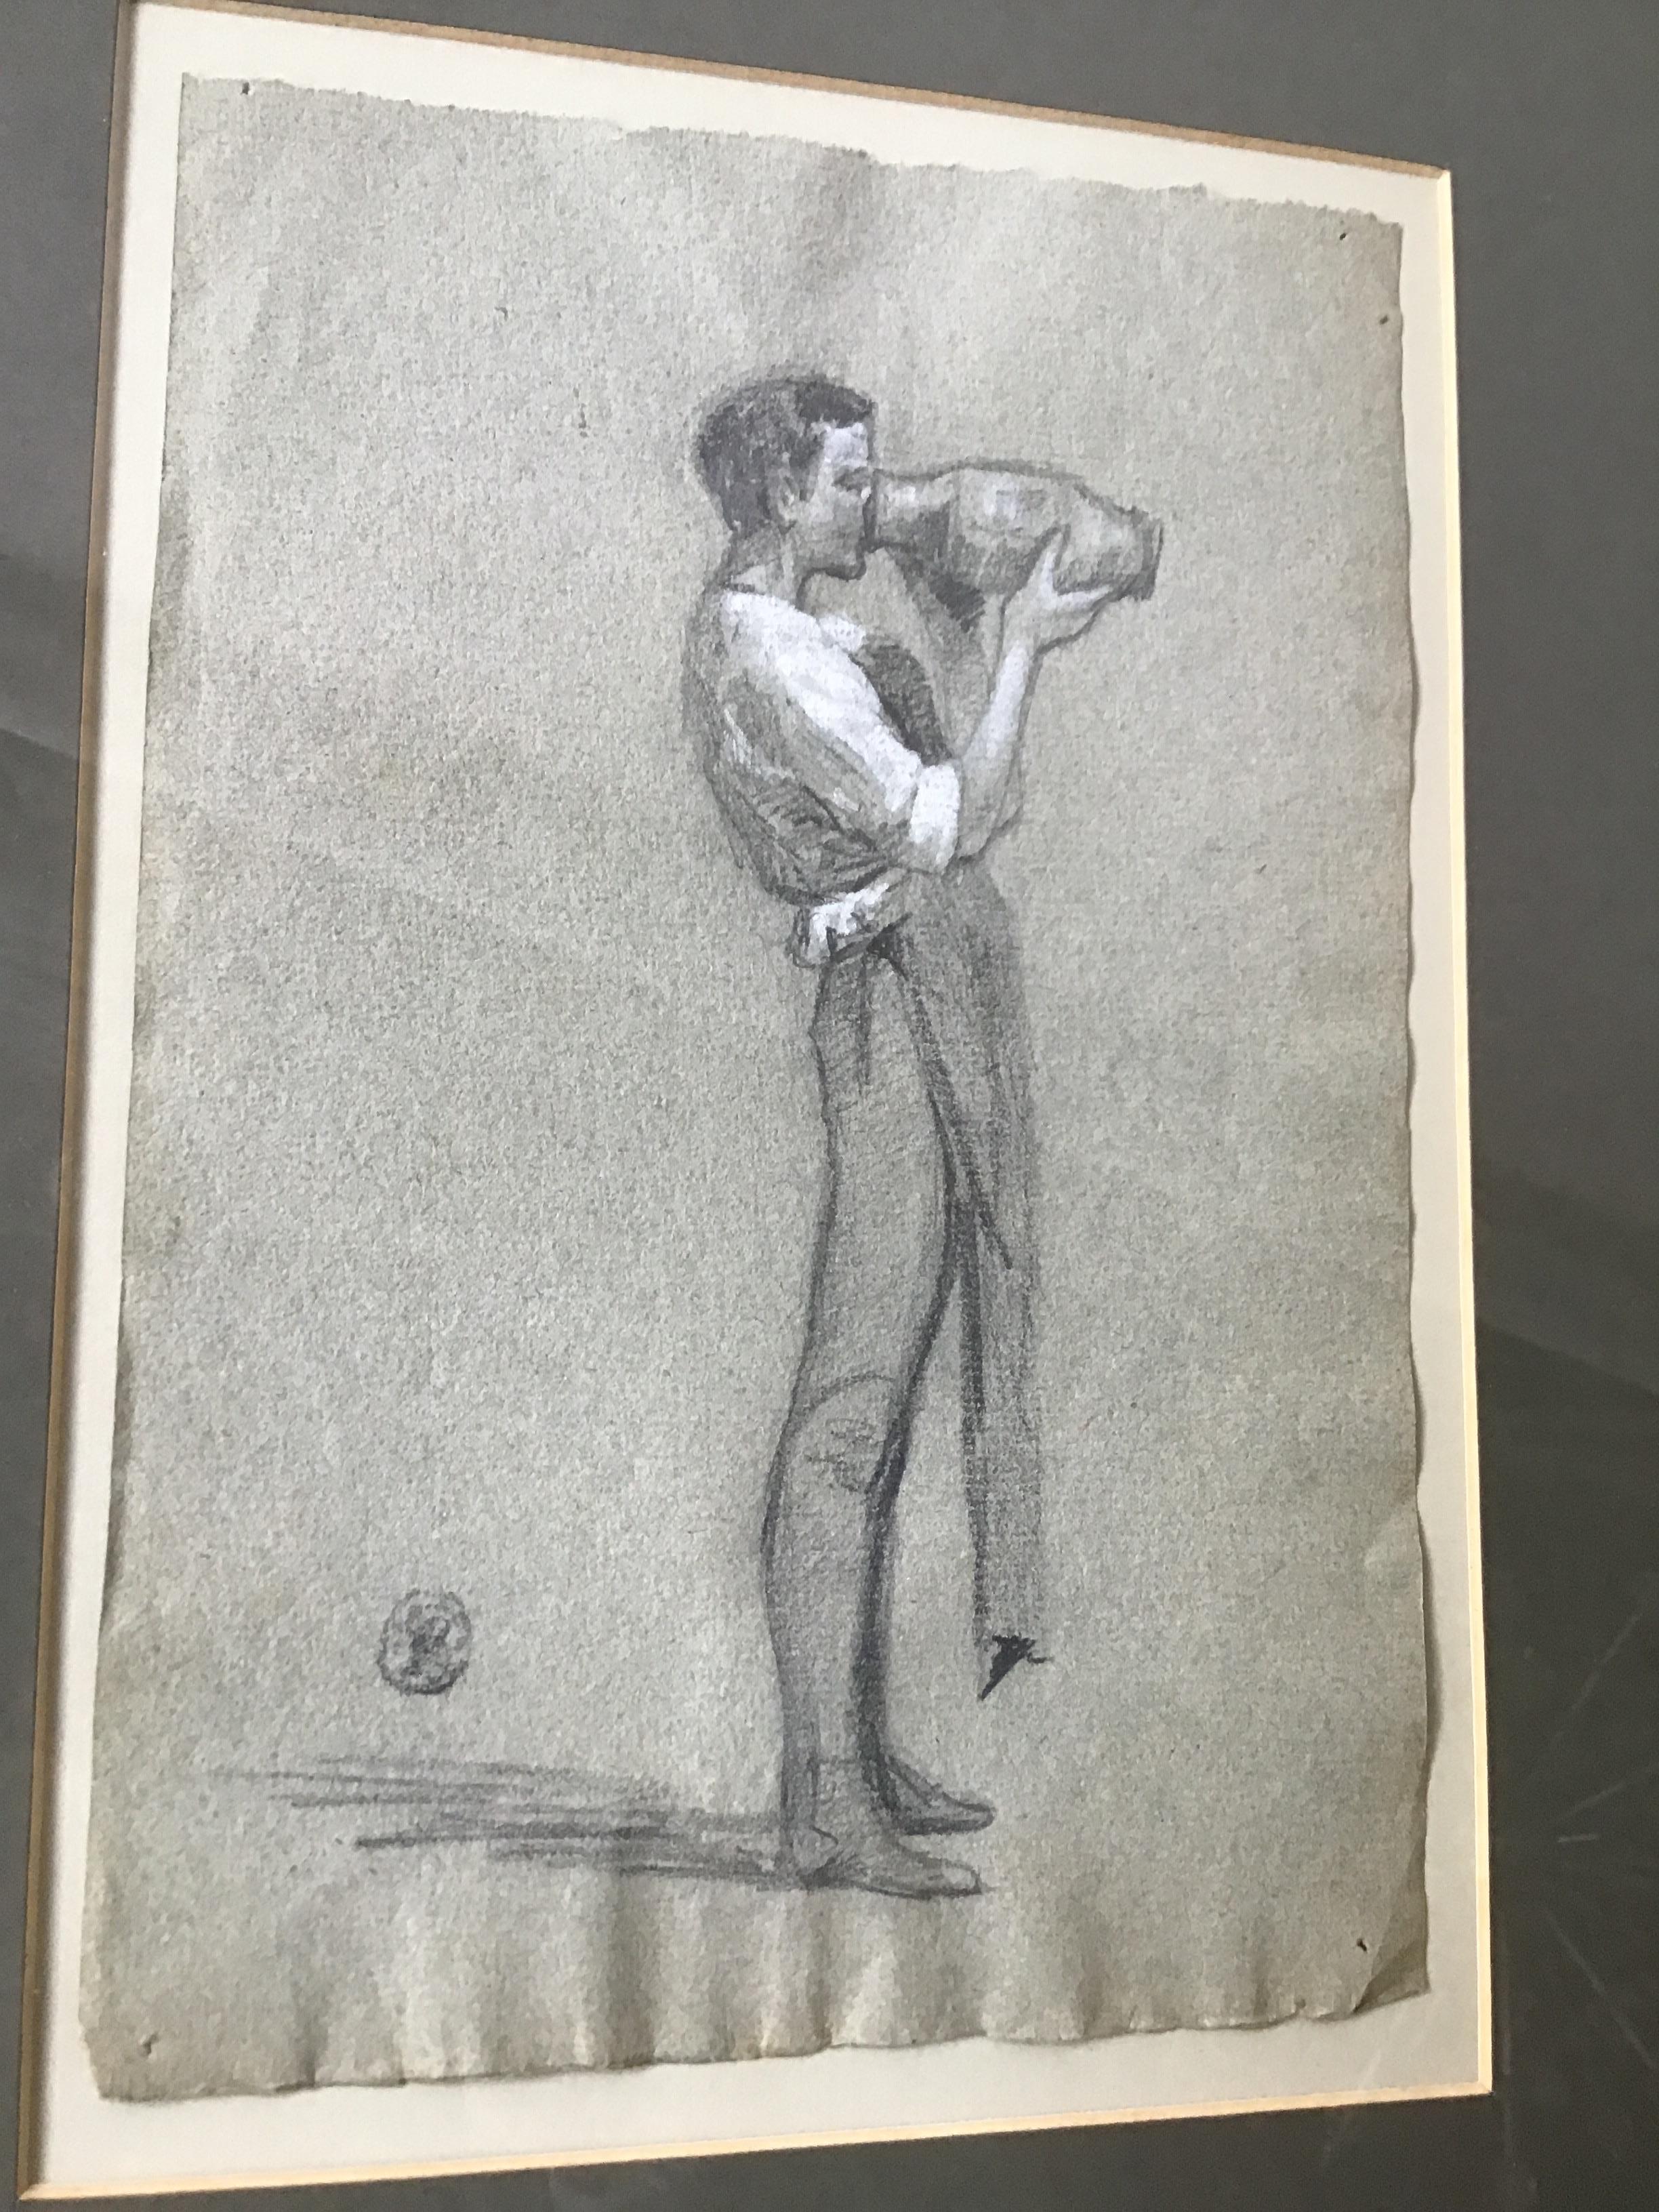 1870s English charcoal drawing of a young man wearing a workers smock.